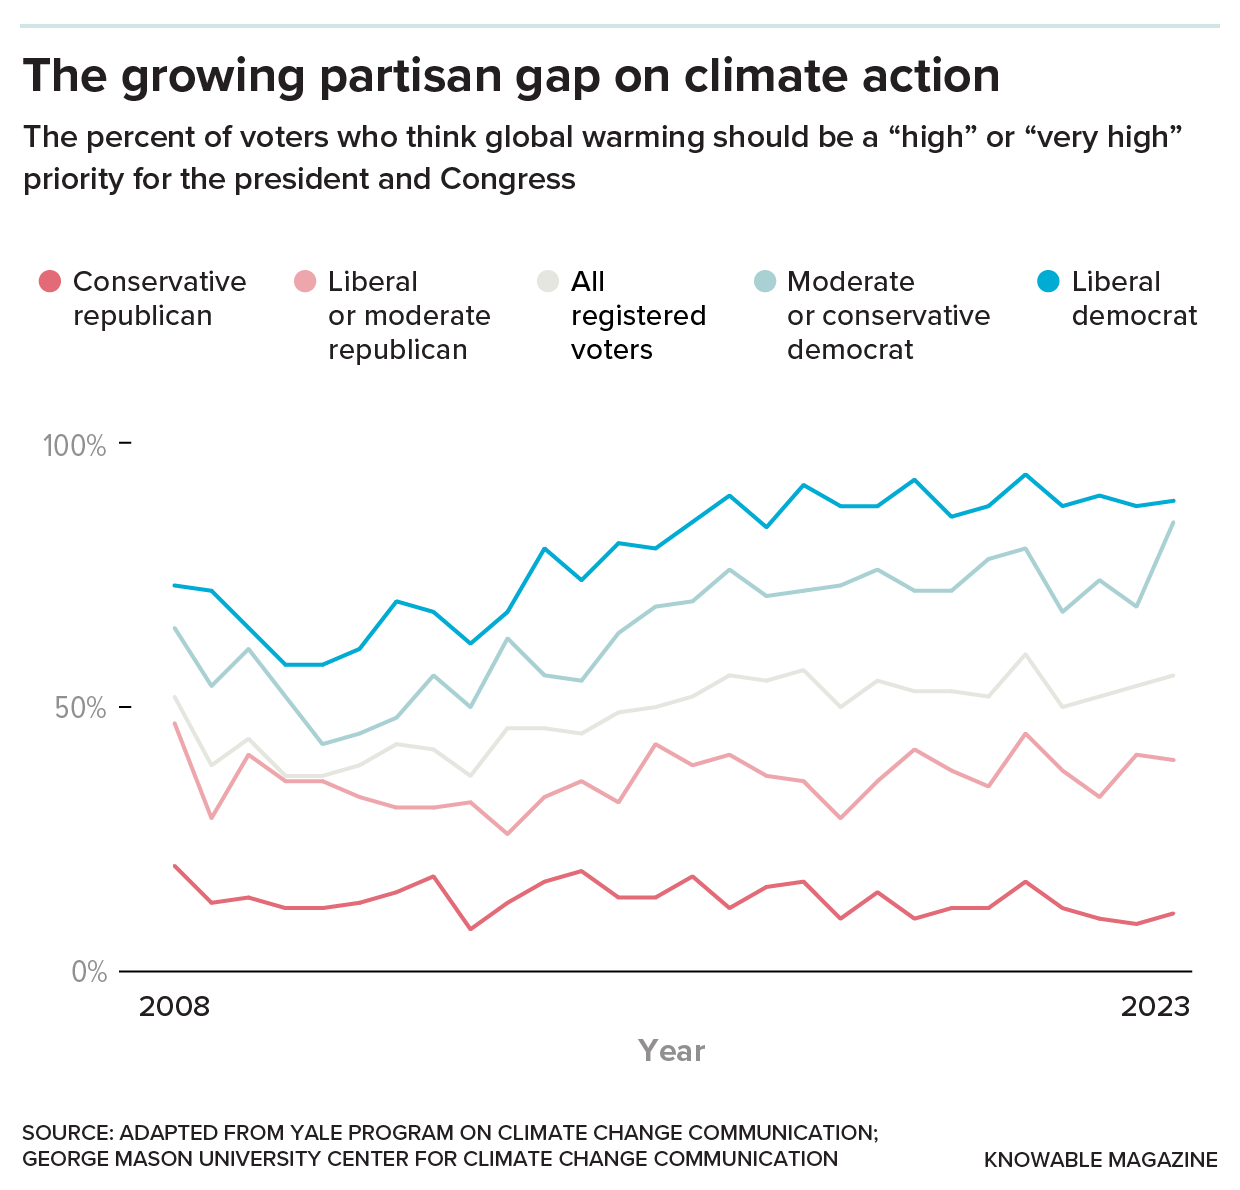 The growing partisan gap on climate change